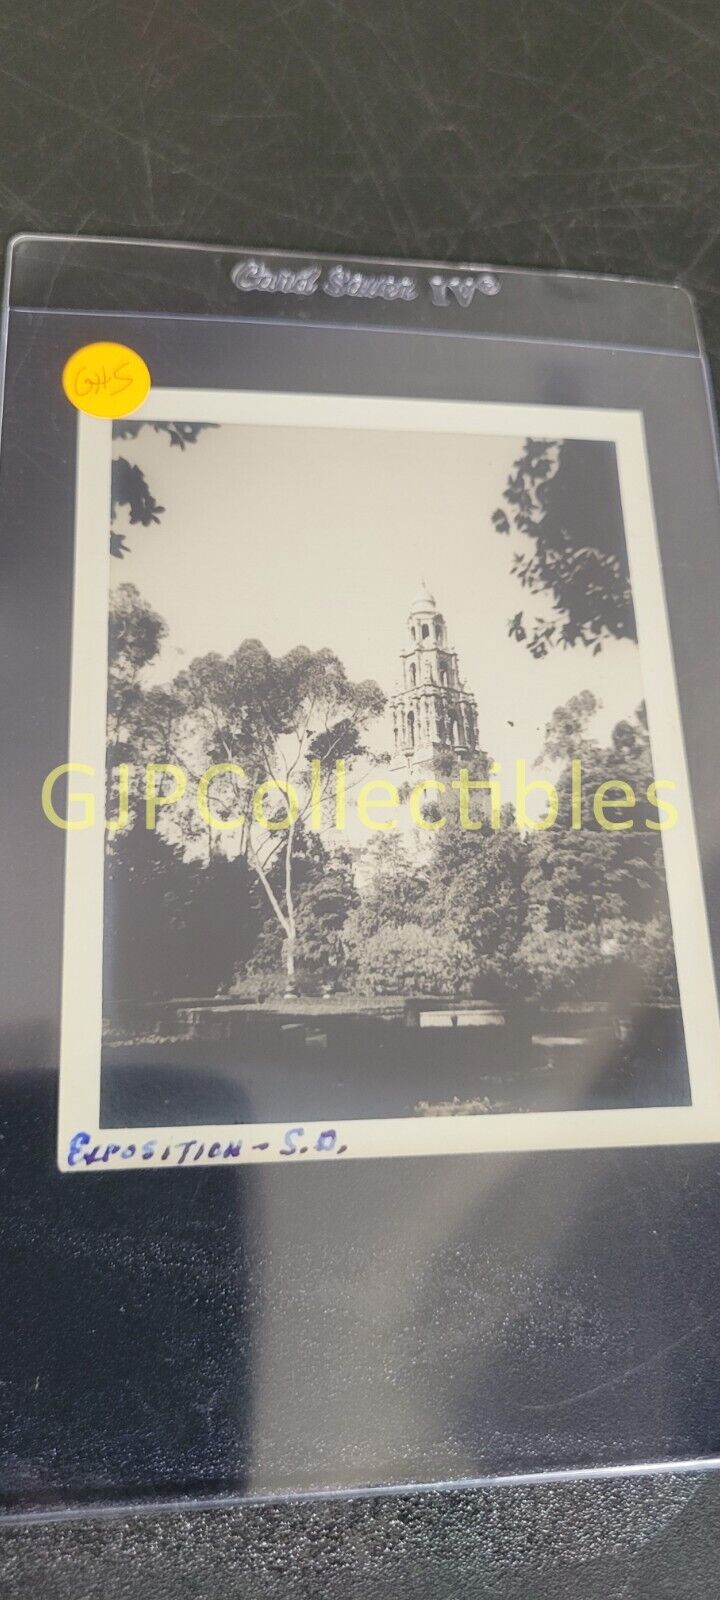 GHS VINTAGE PHOTOGRAPH Spencer Lionel Adams EXPOSITION SD